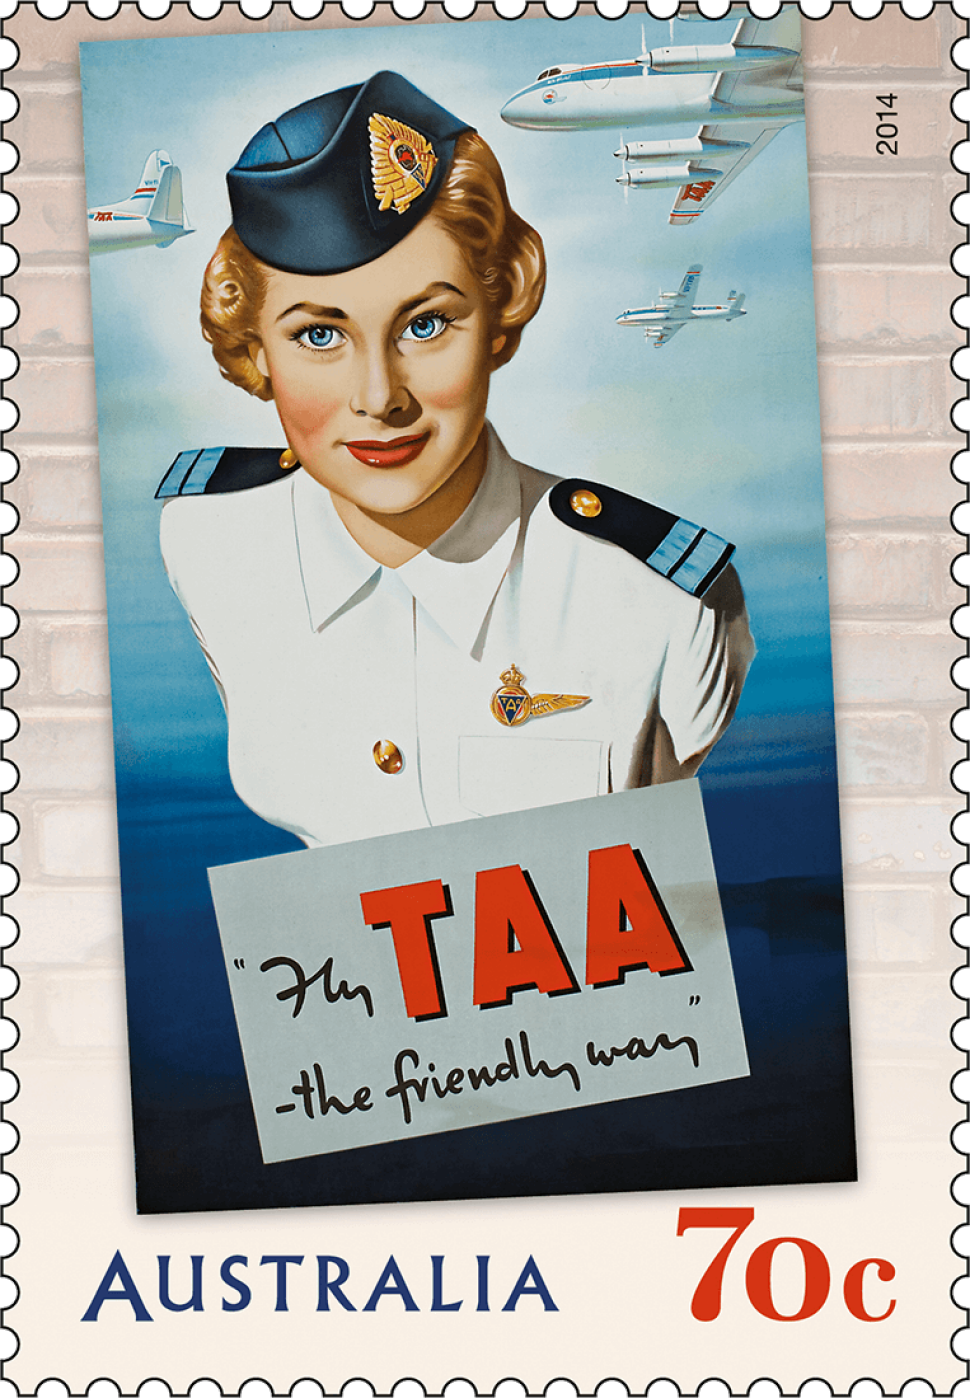 70c Fly TAA the Friendly Way stamp